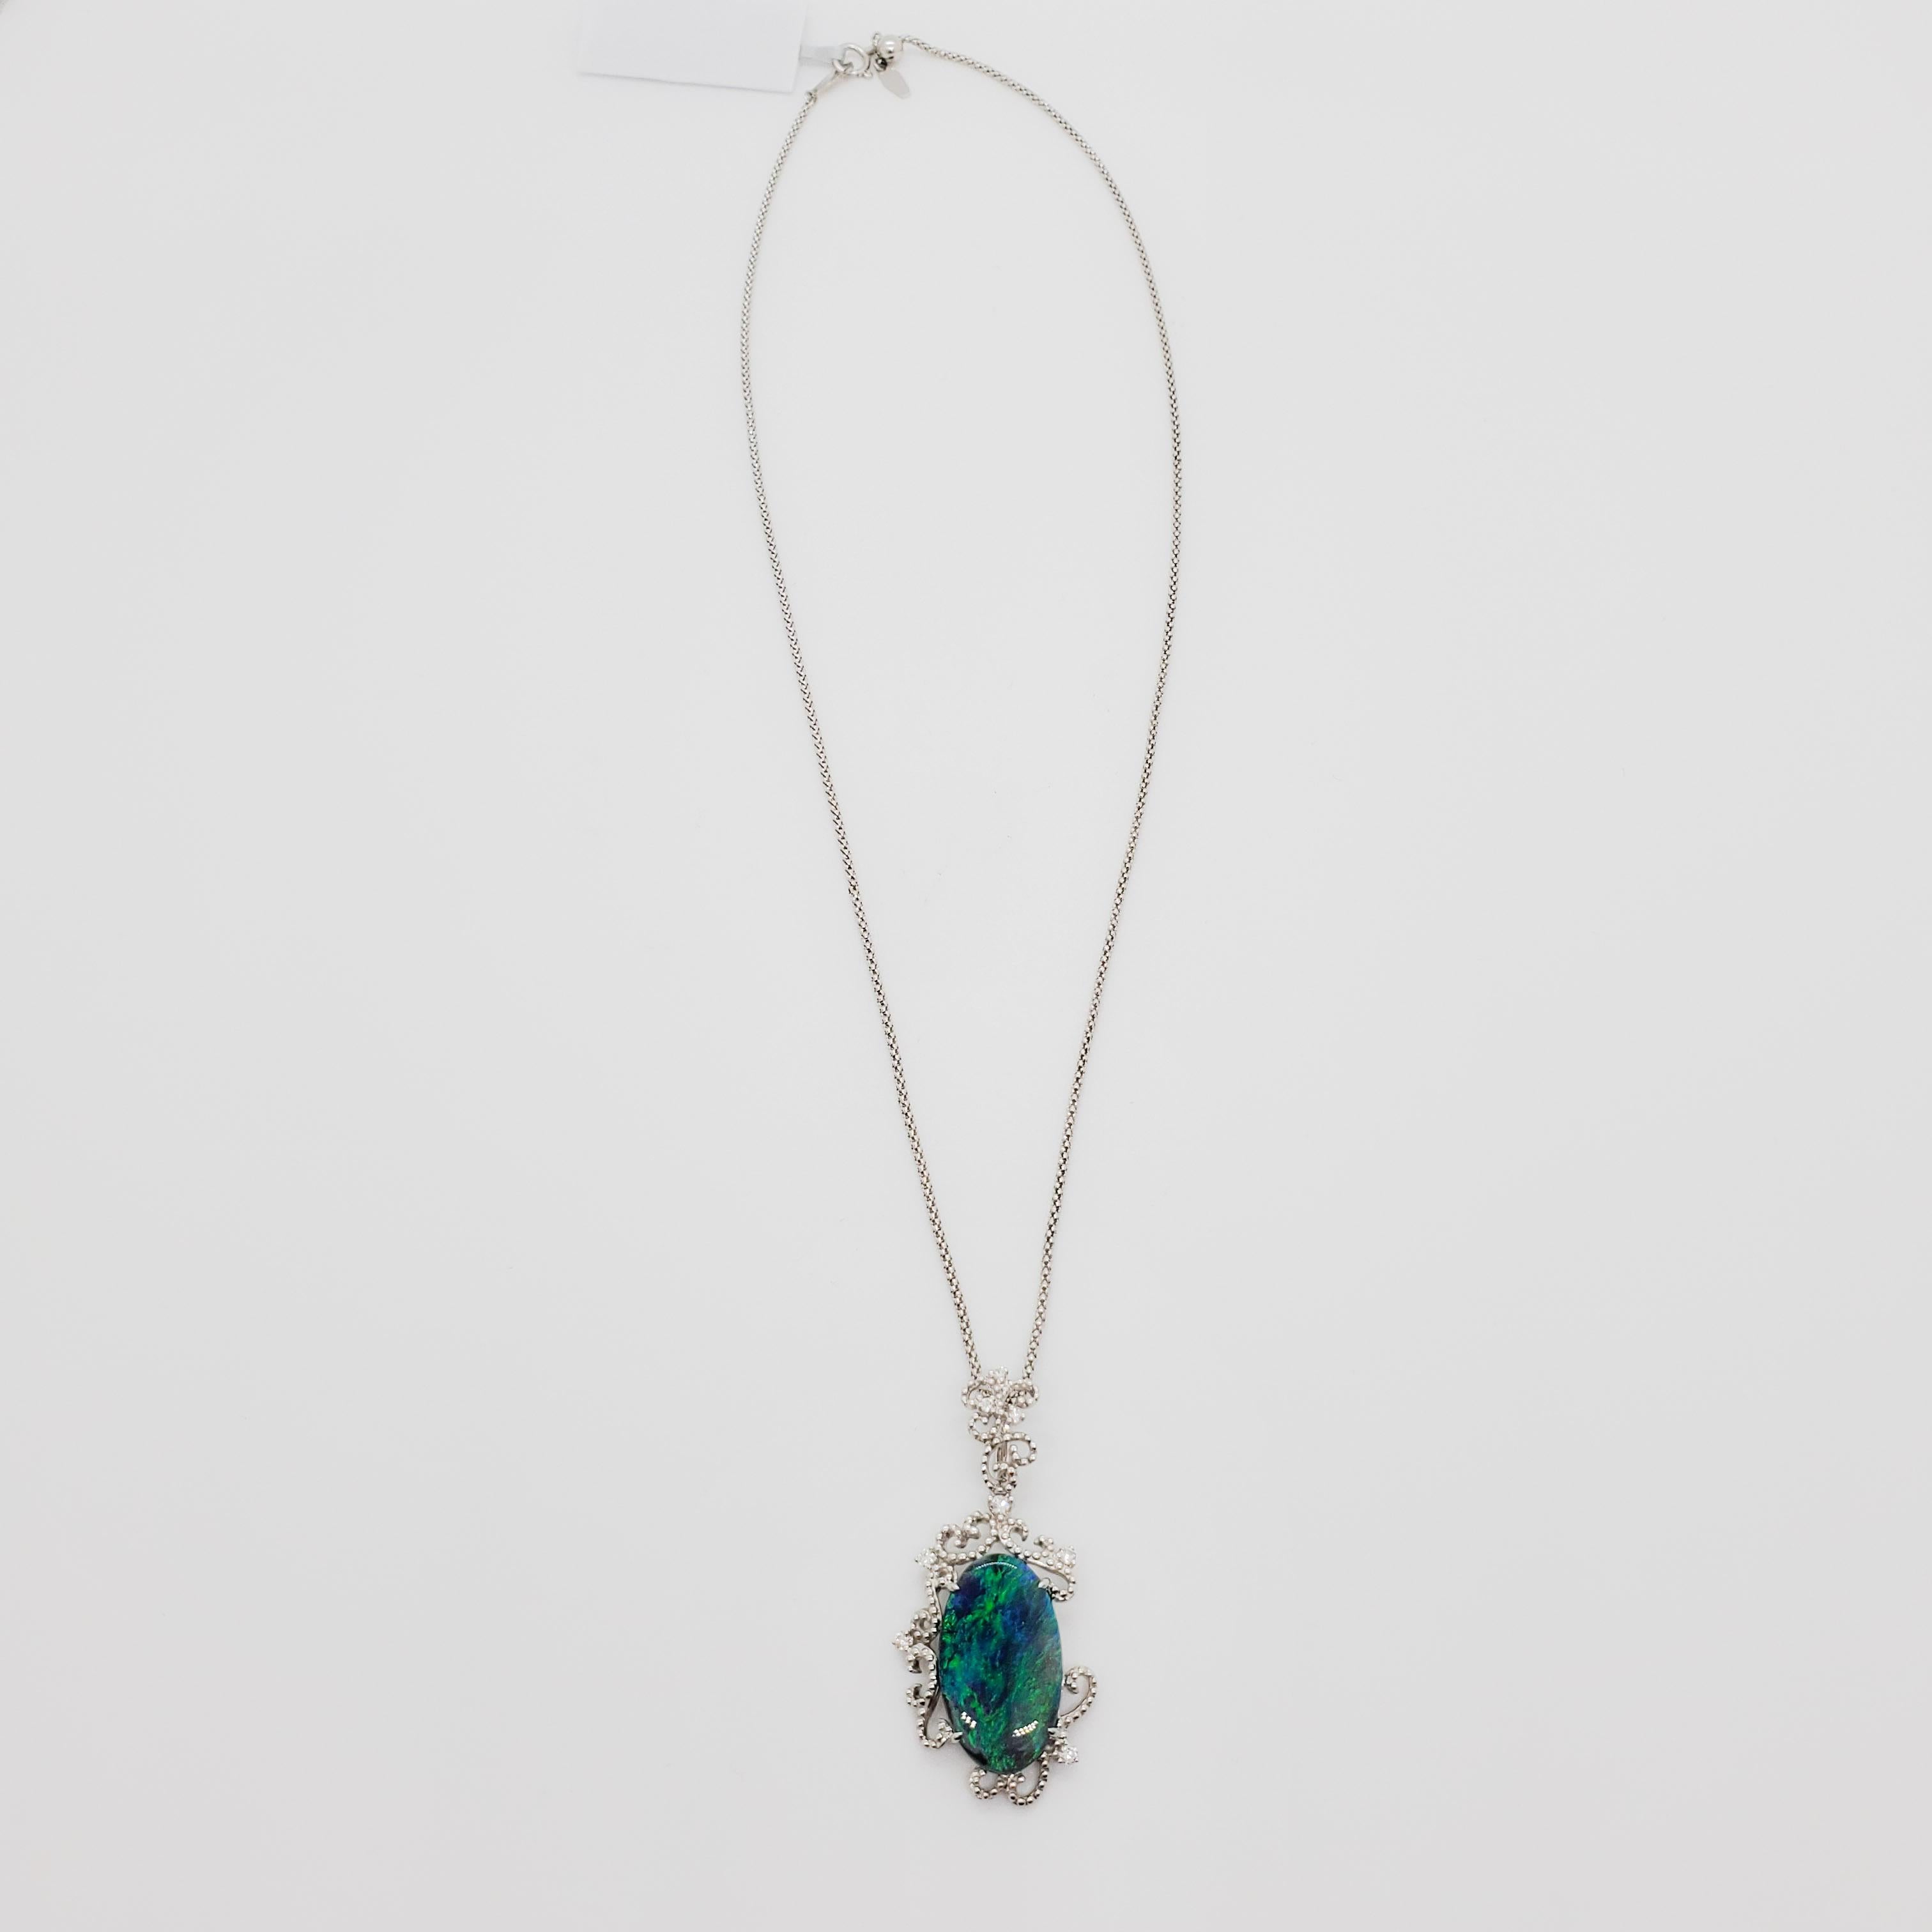 Black Opal and Diamond Pendant Necklace in 18k White Gold 3